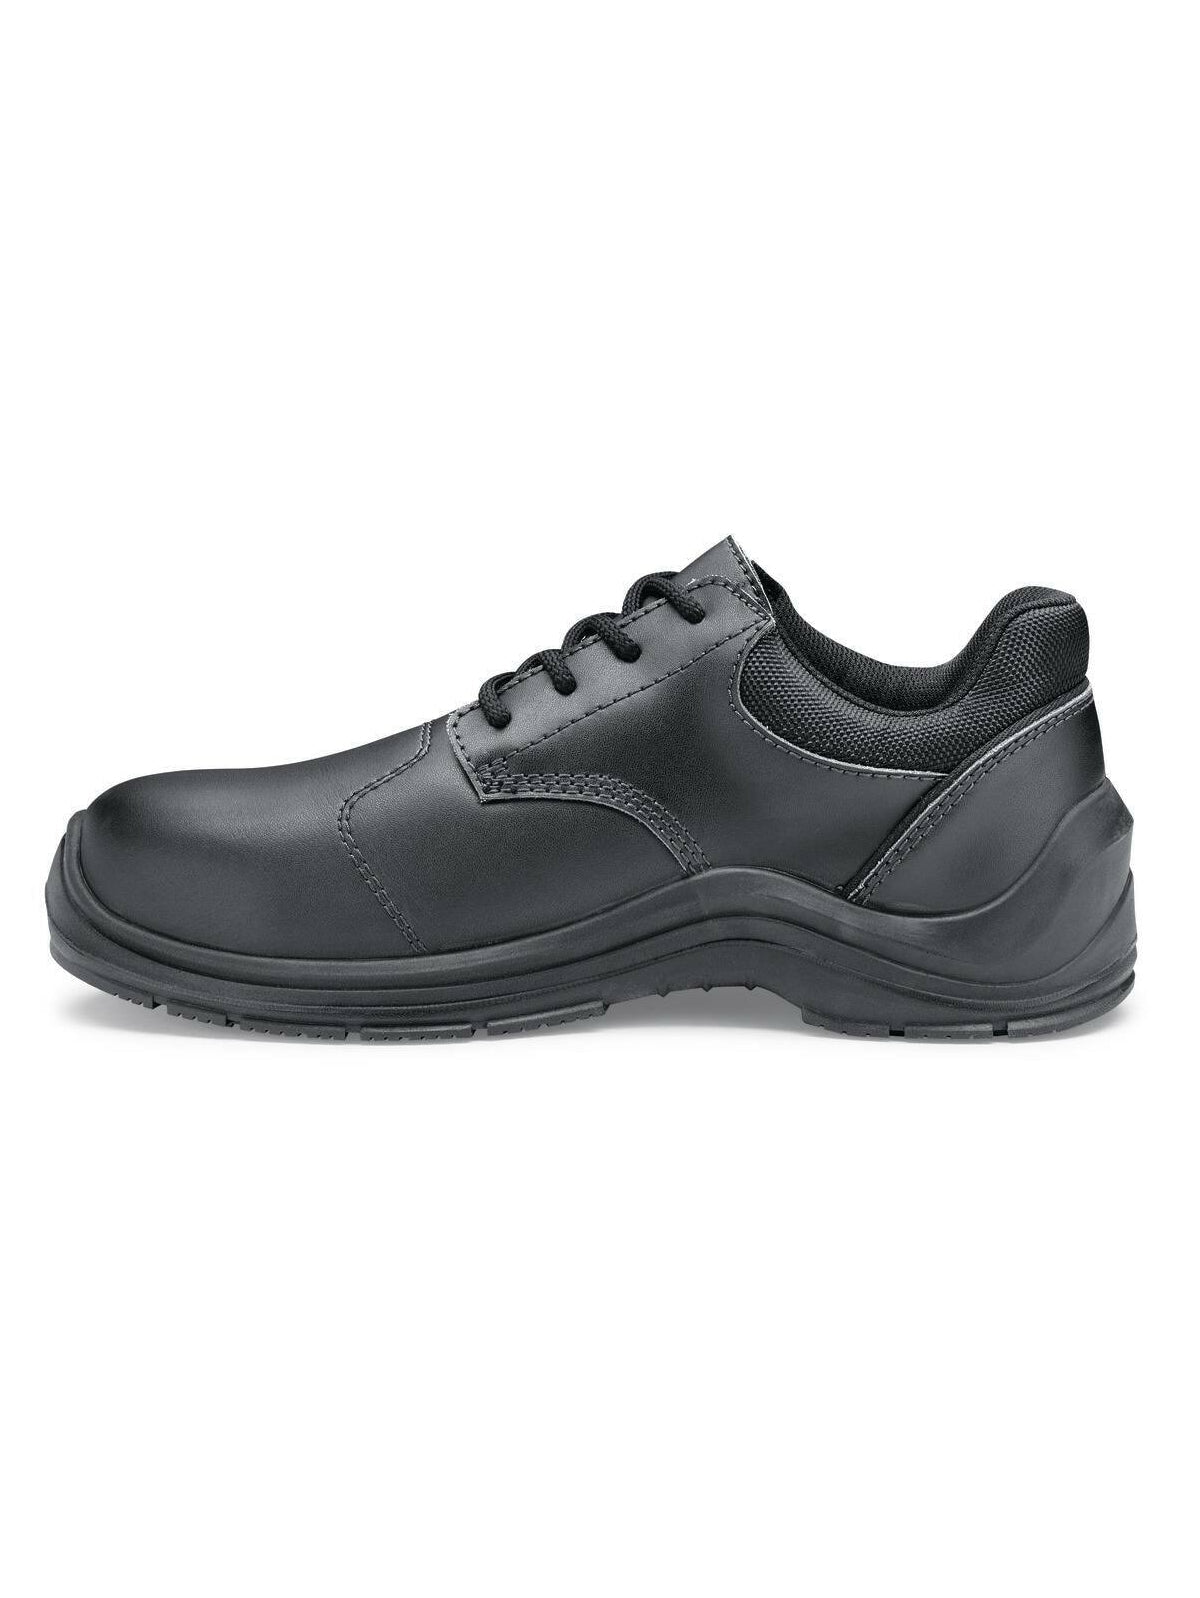 Unisex Safety Shoe Roma81 (S3) by Safety Jogger -  ChefsCotton